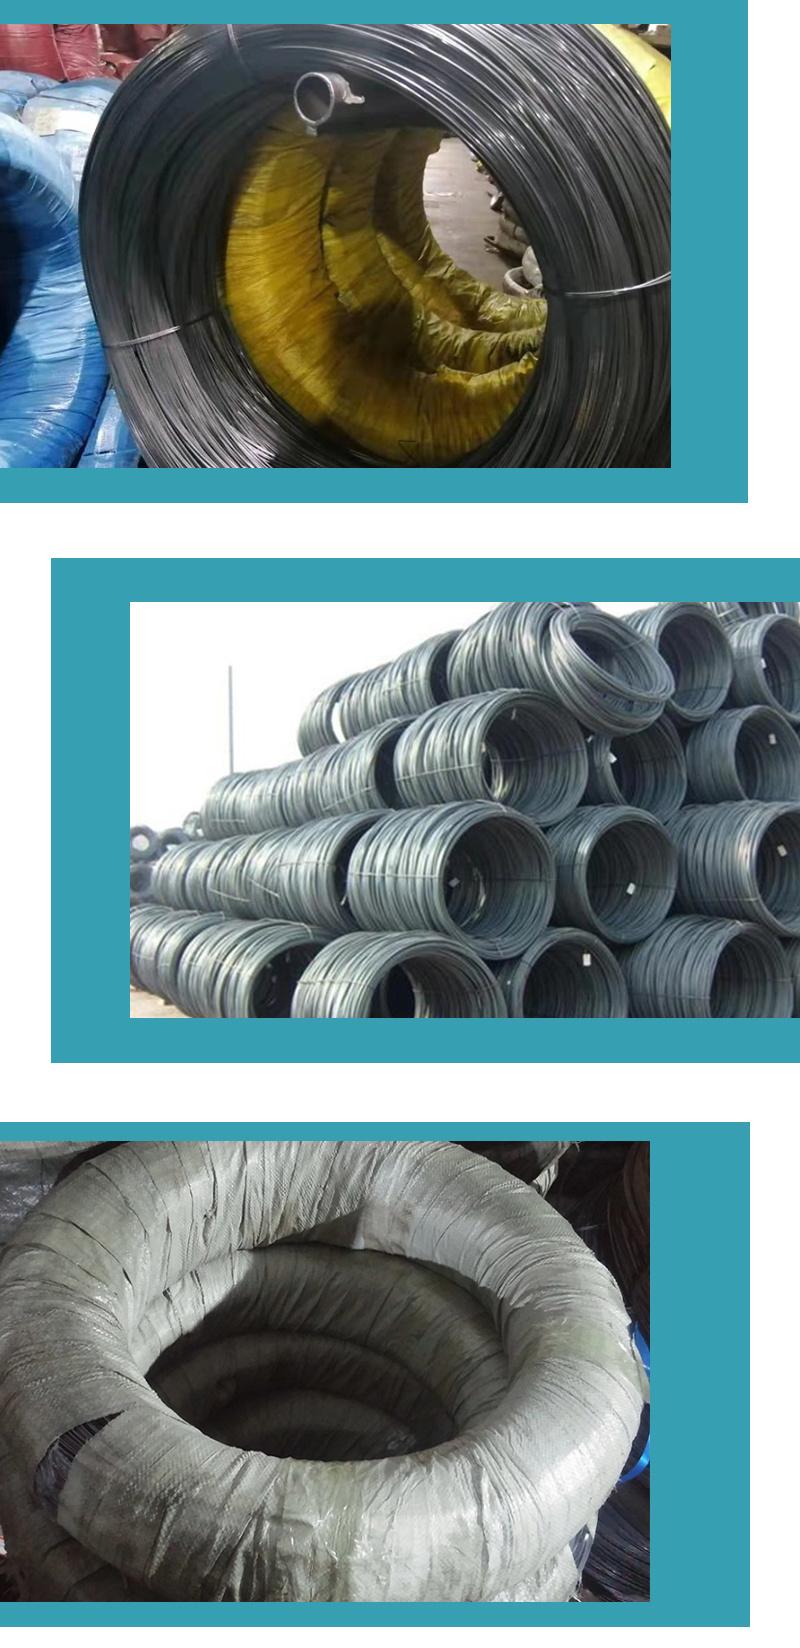 High Quality G 3521 Screen Mesh Steel Wire